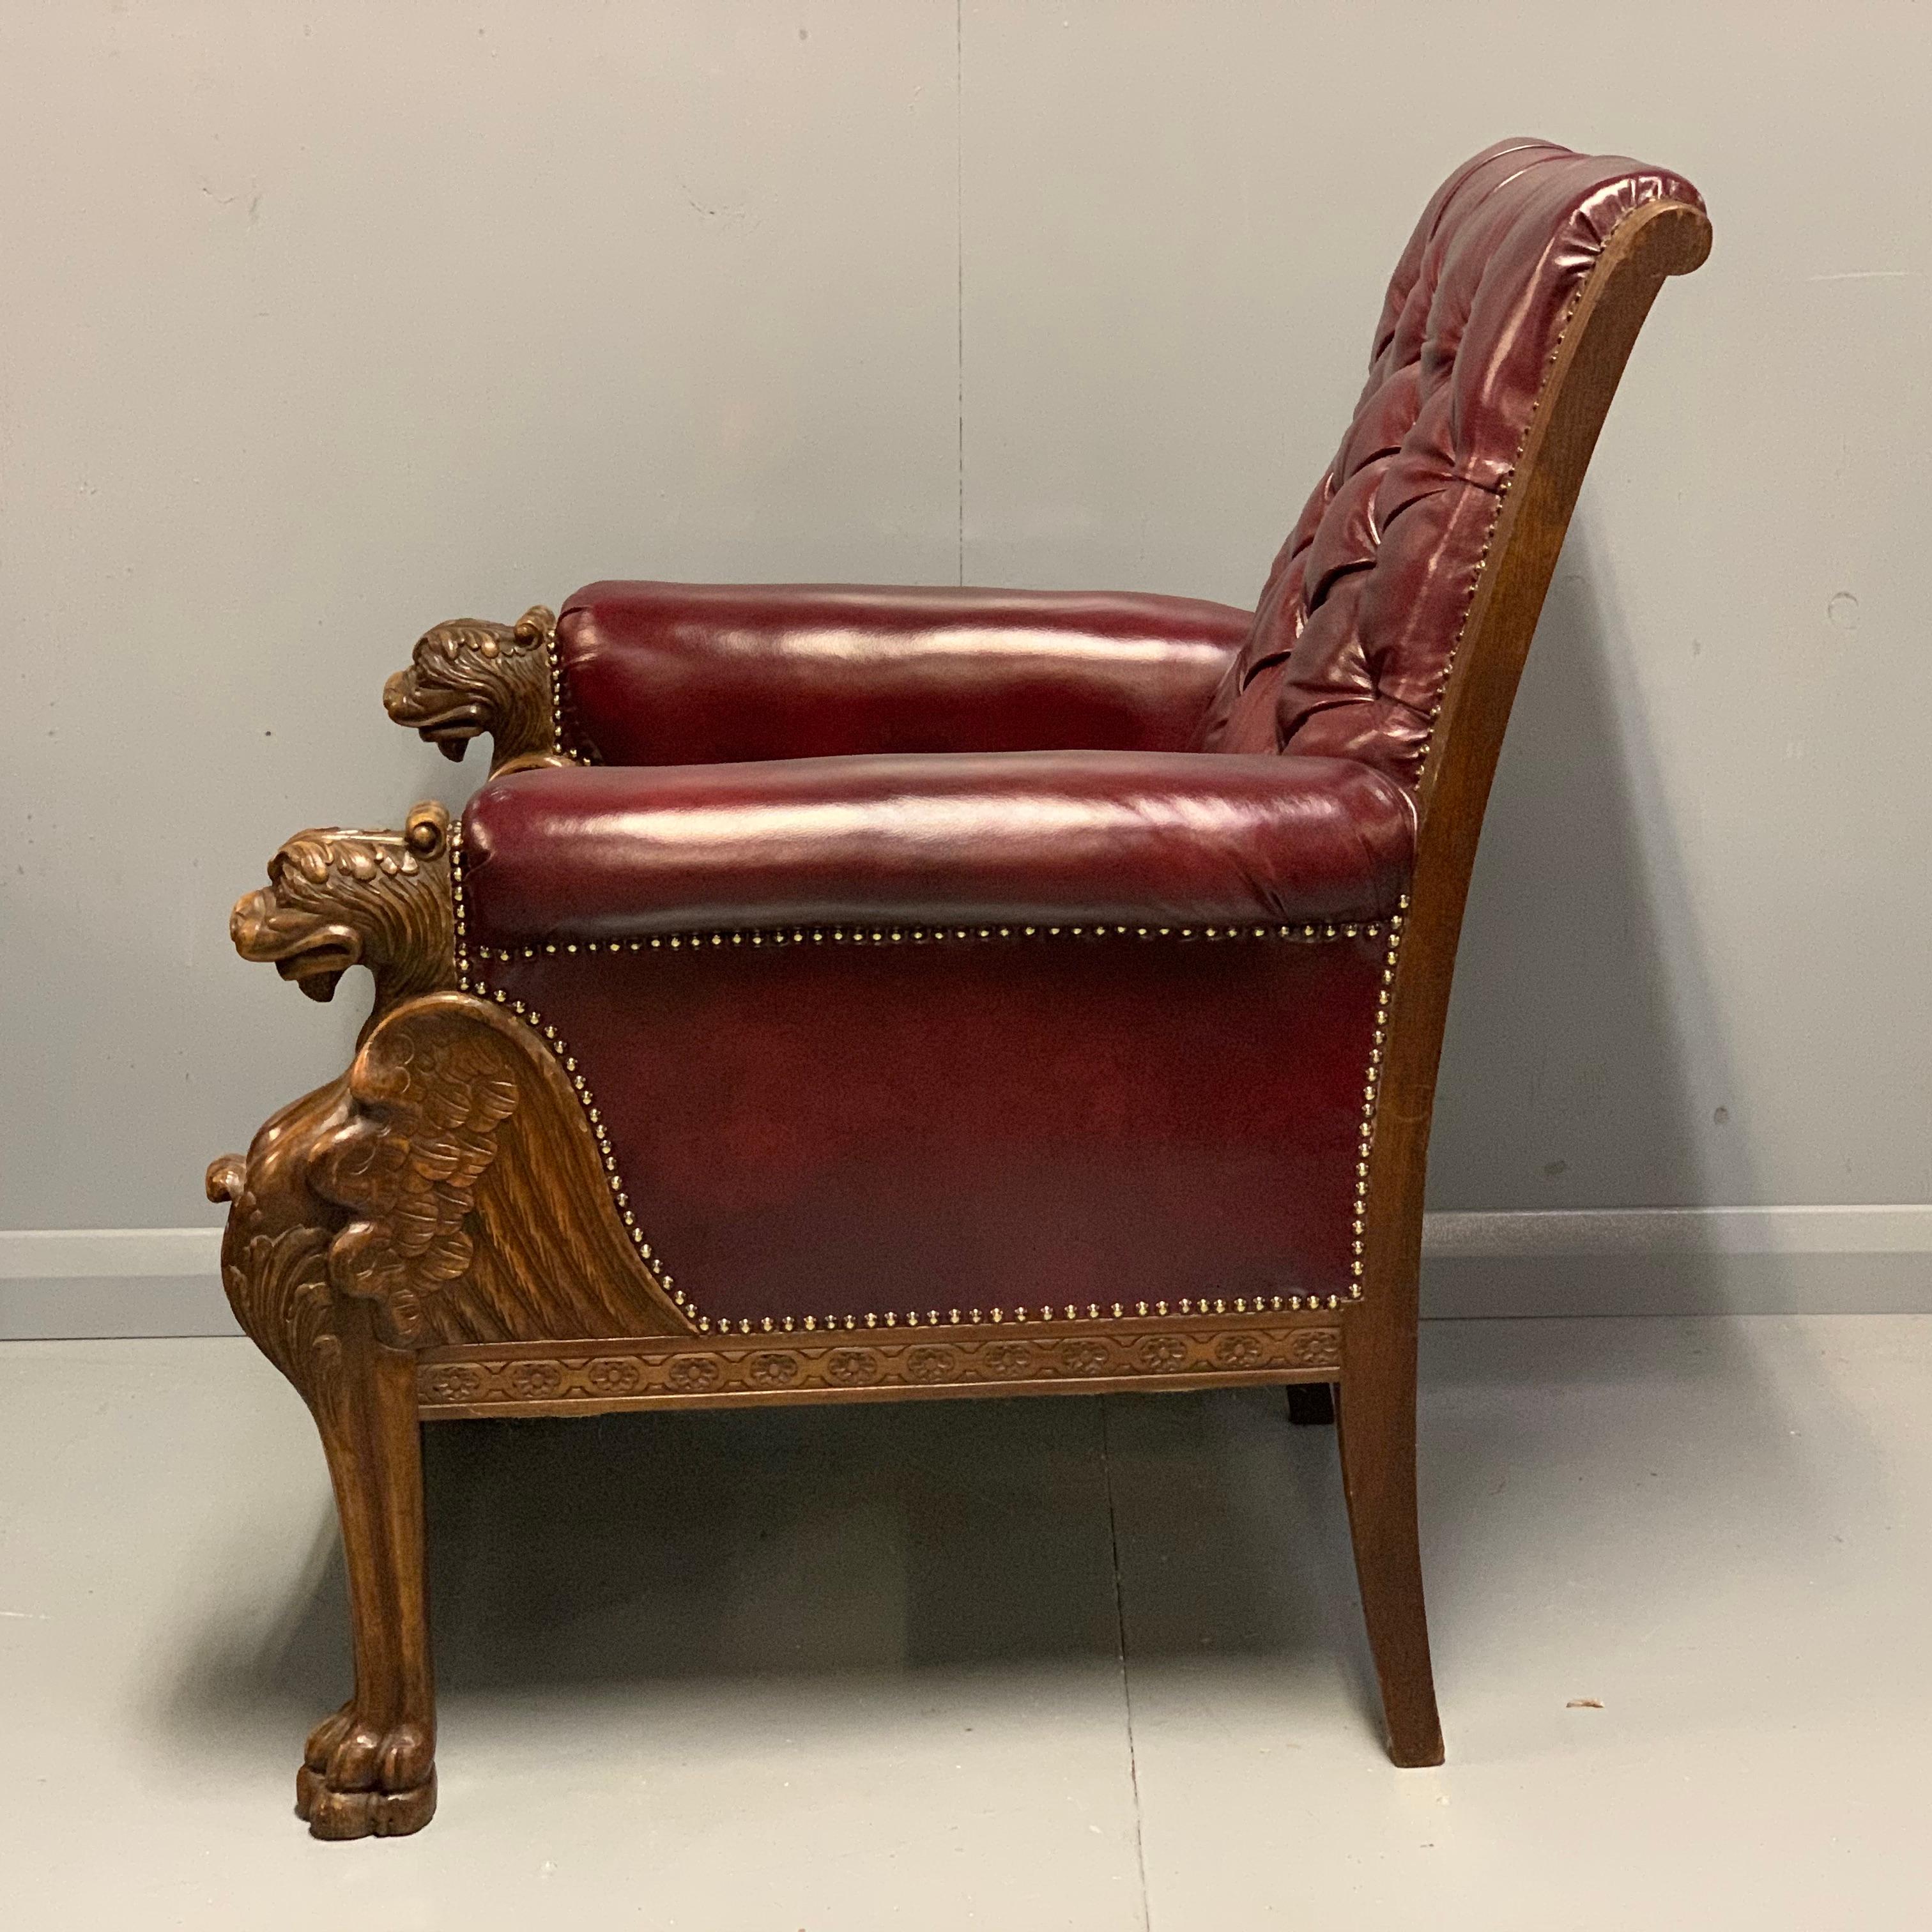 Carved Large Pair of Mid-19th Century European Buttoned Leather Armchairs with Griffins For Sale